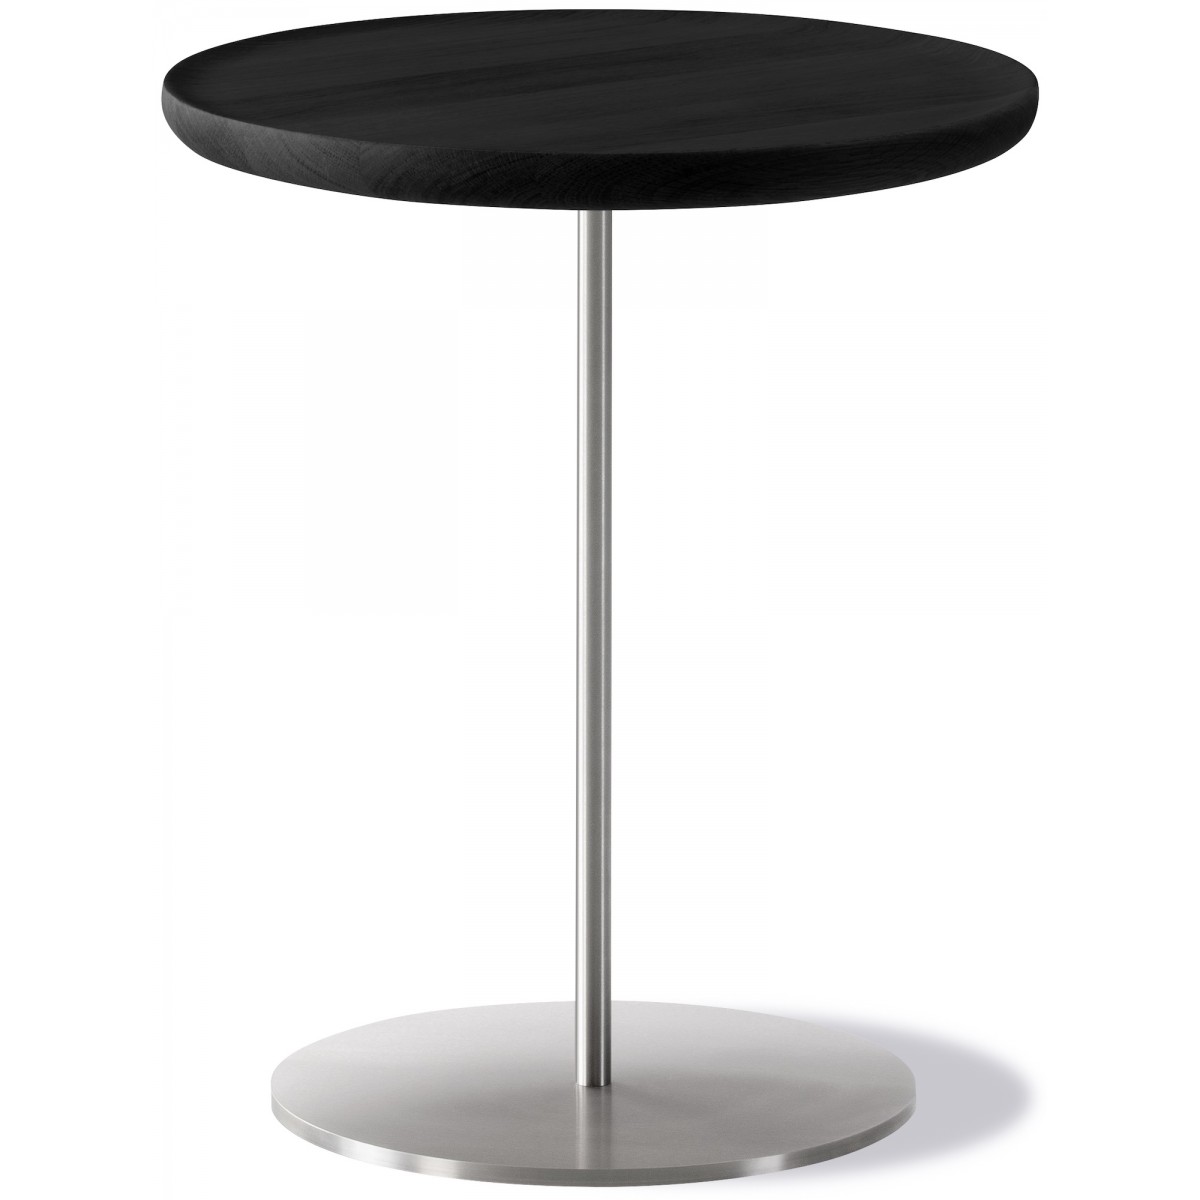 black lacquered oak / stainless steel, brushed - side table Pal 6751